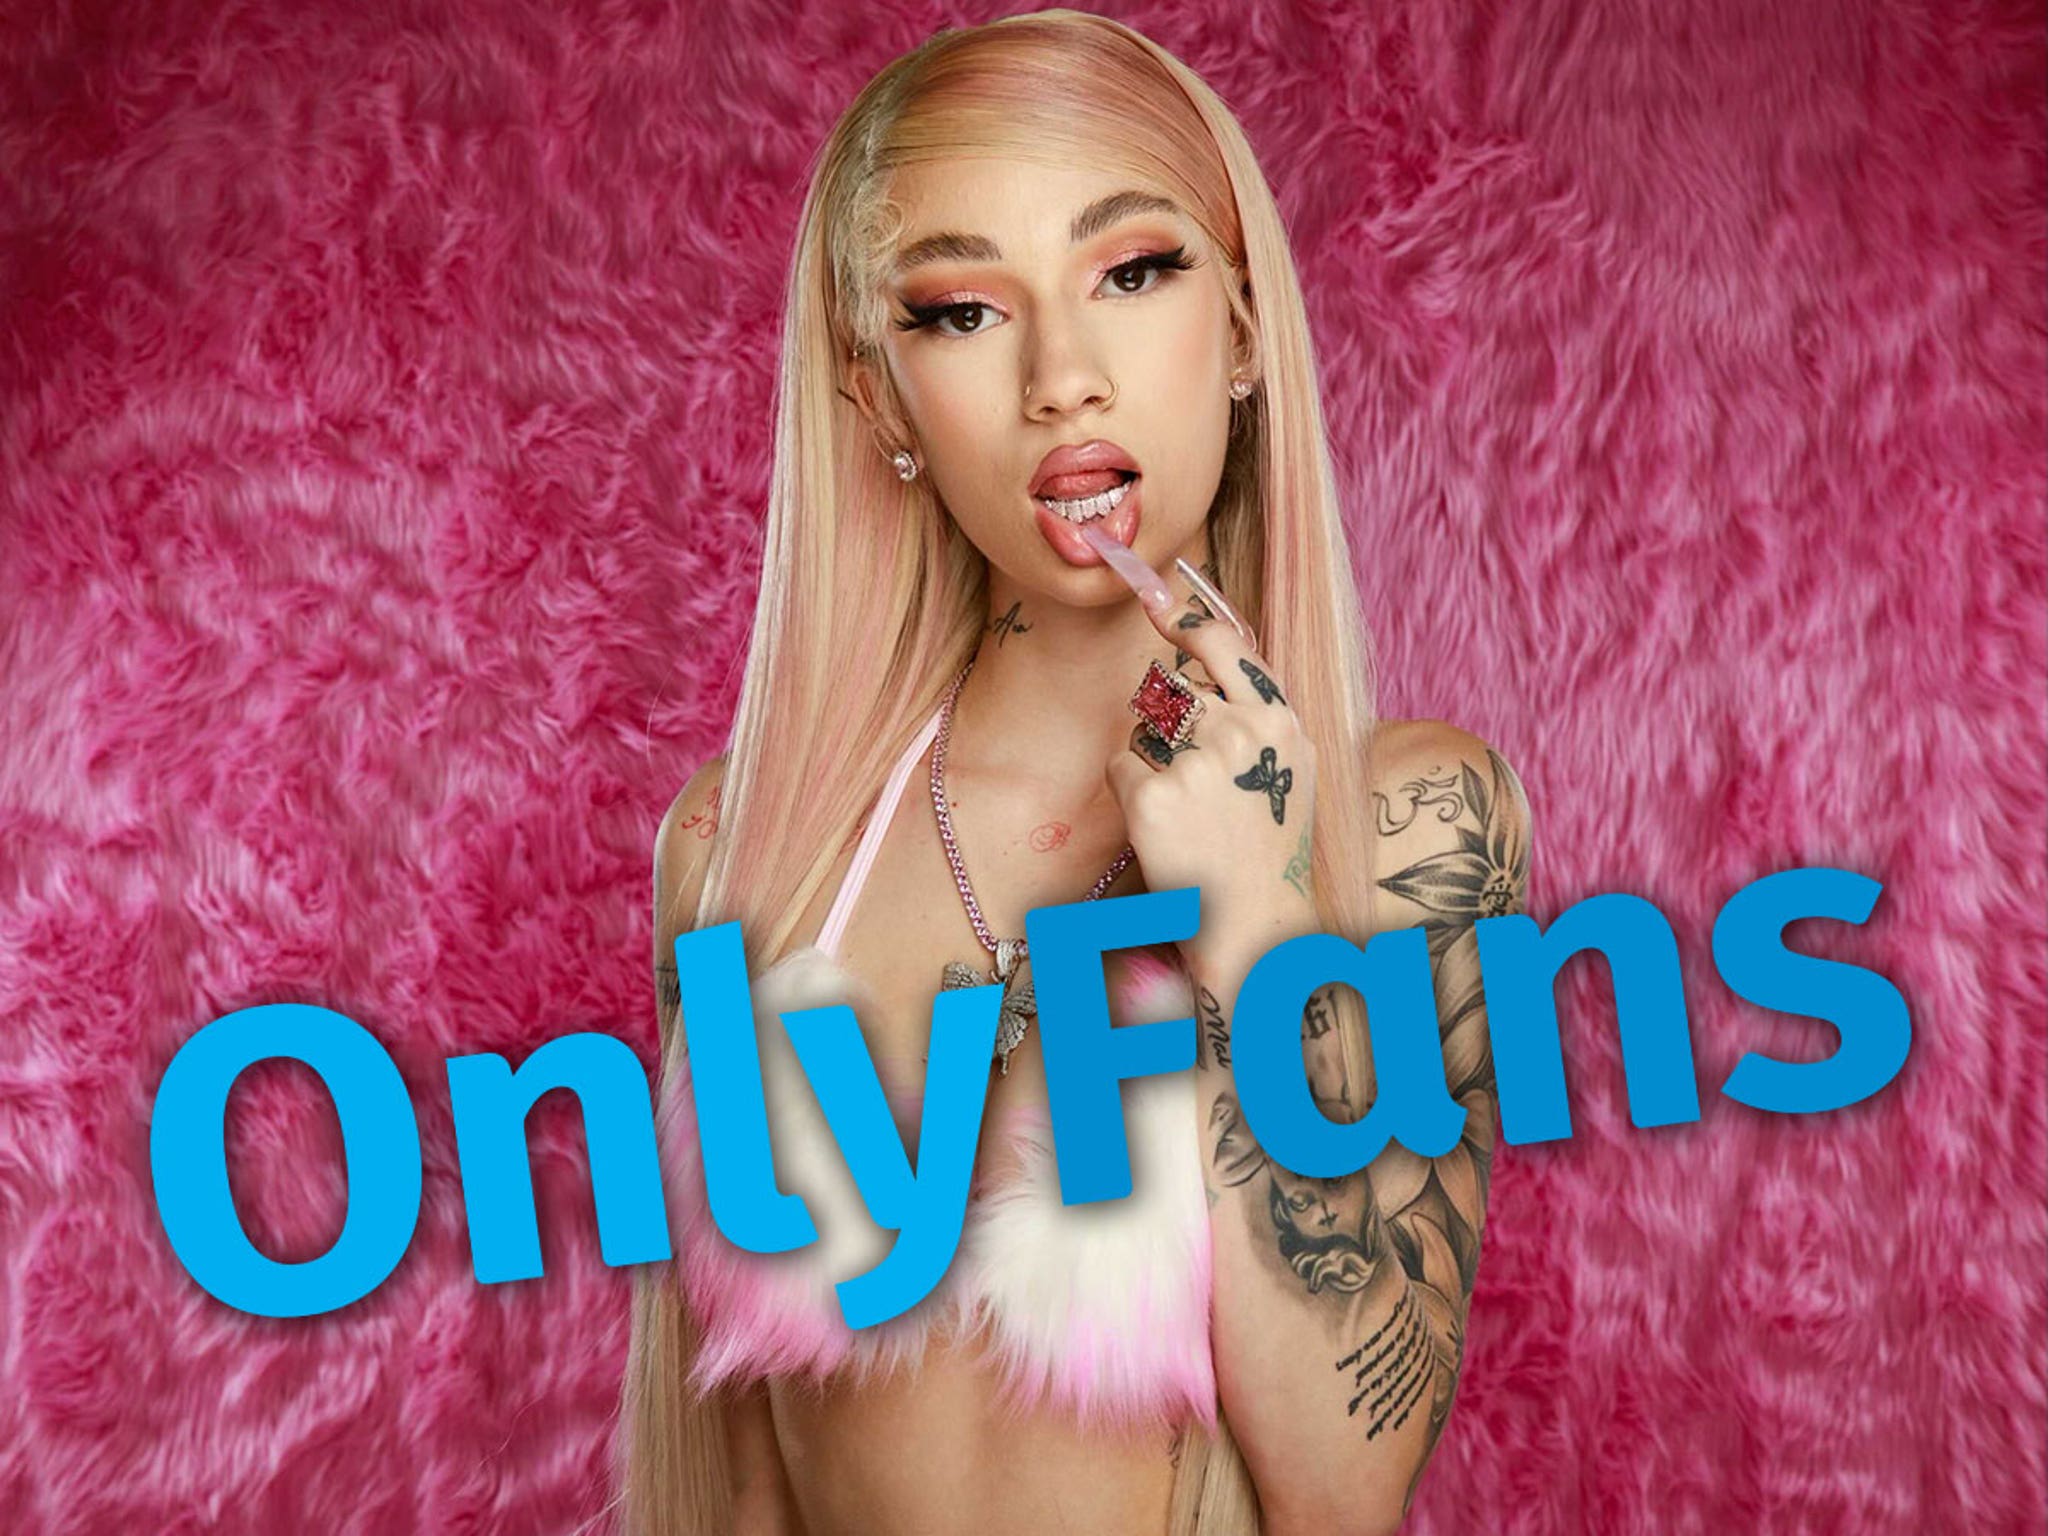 Bhadbhabie free onlyfans